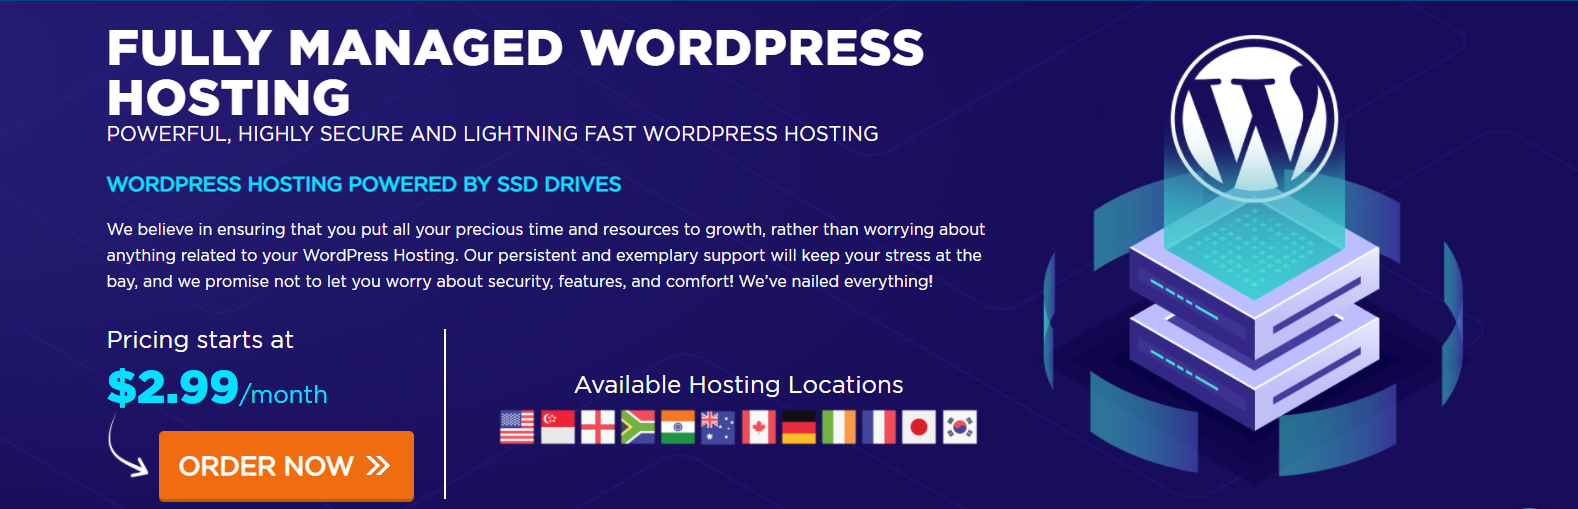 AccuWebHosting WordPress Offer-Value-Above-the-Fold